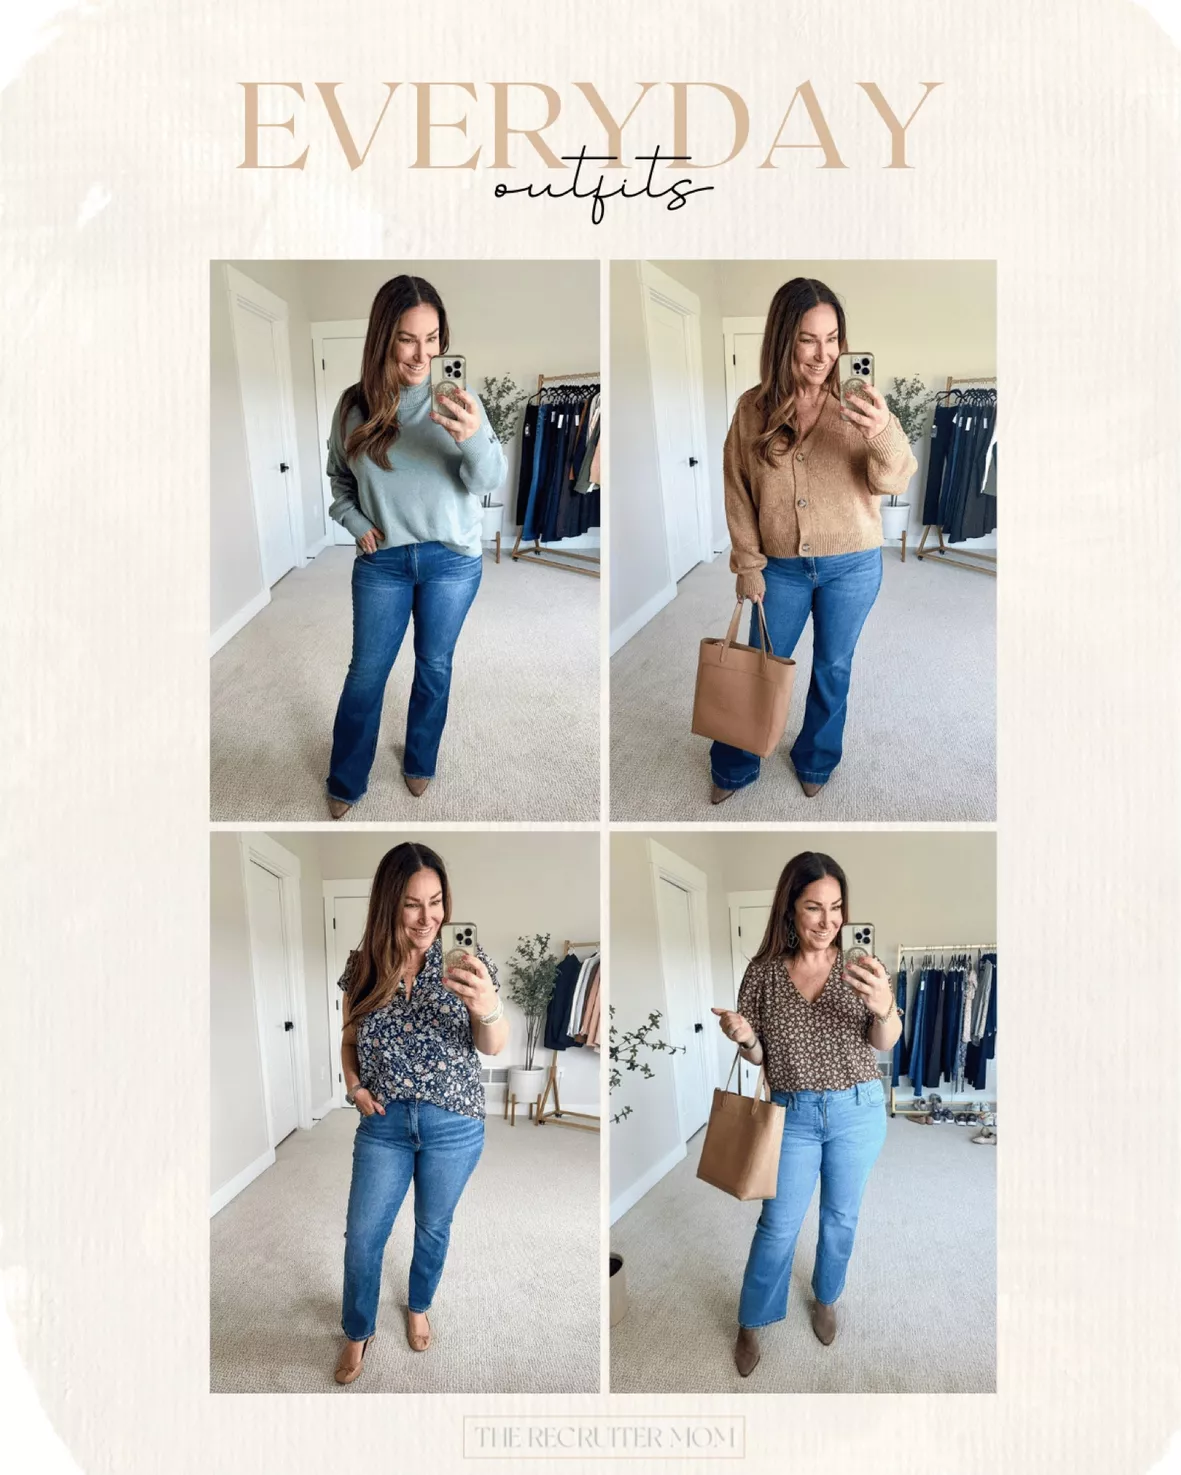 10 WINTER OUTFITS & ESSENTIALS - The Recruiter Mom